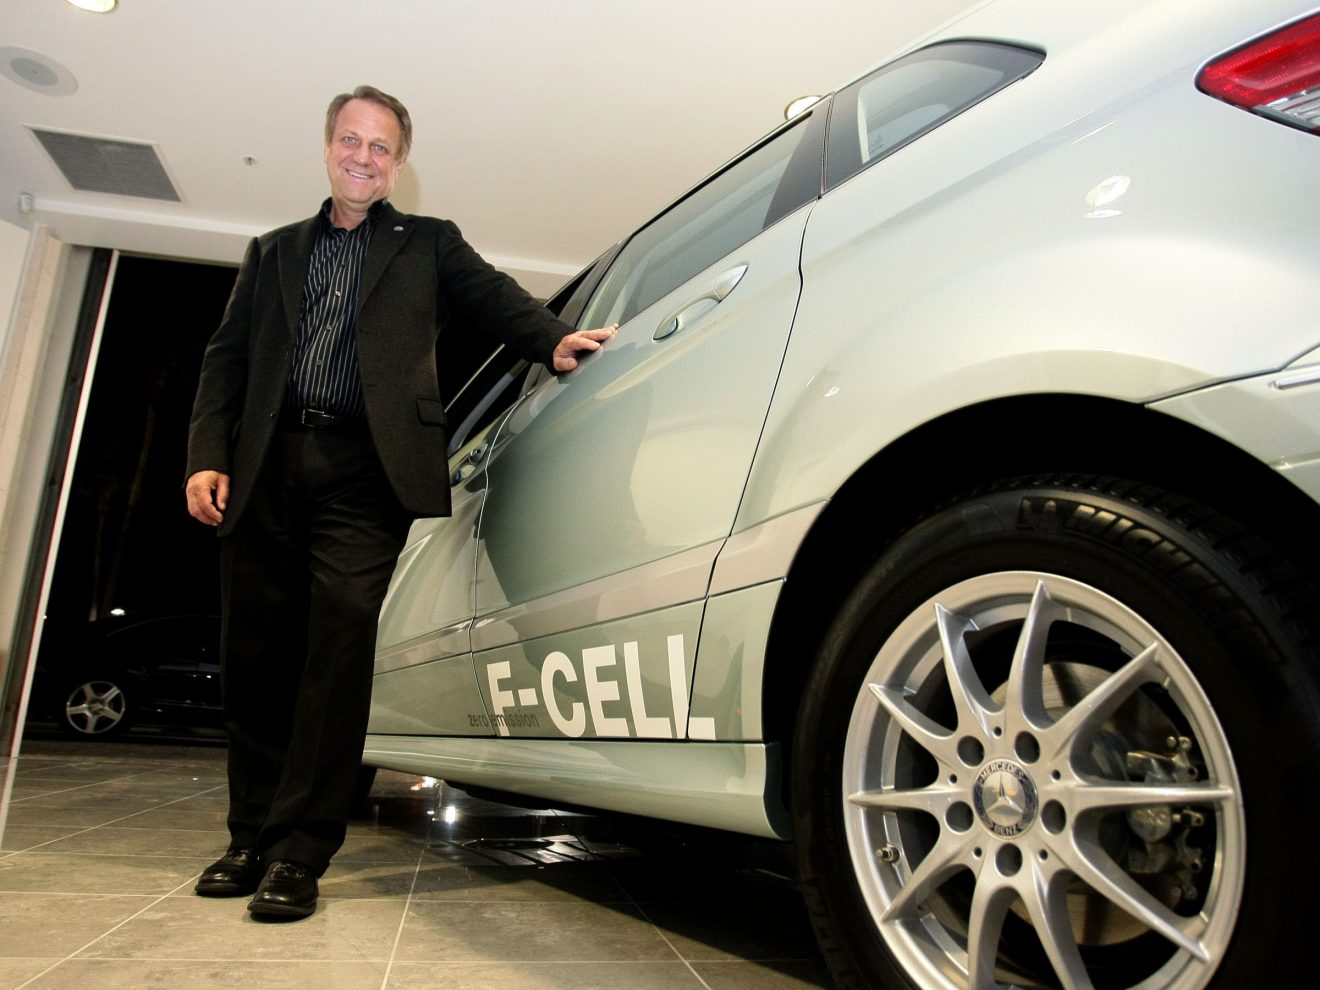 Mercedes-Benz USA Delivers First Customer Zero-Emission F-CELL Vehicle